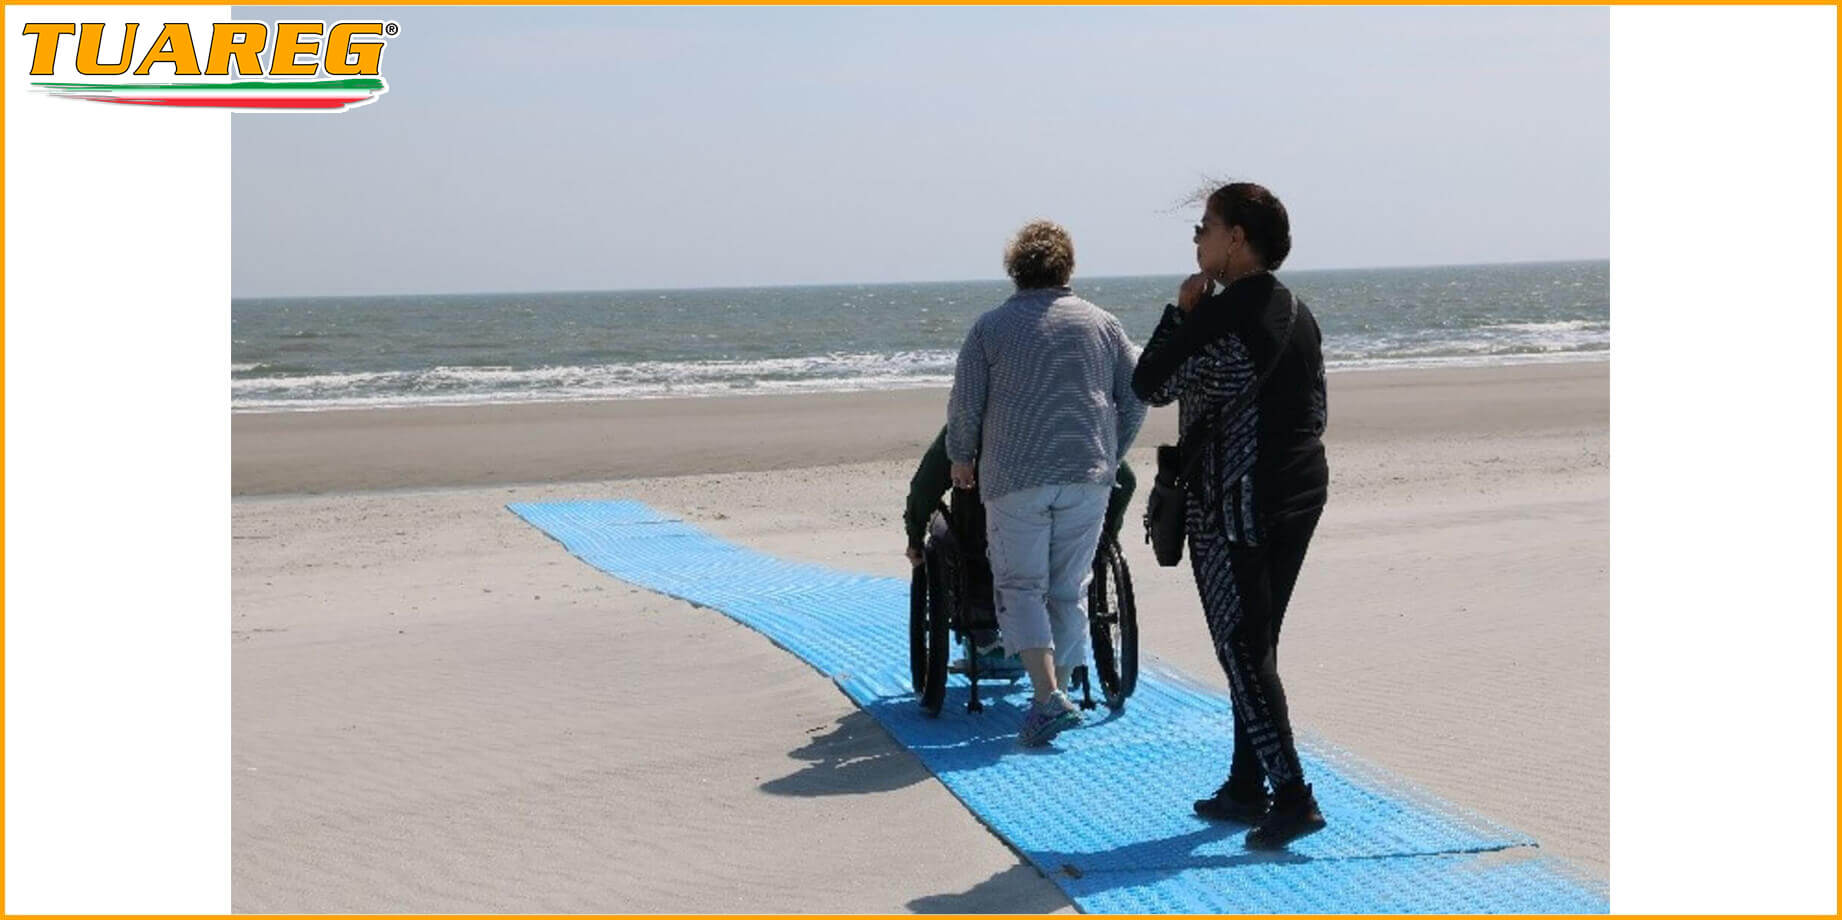 Drive-over Beach Carpet / Walkway - Tuareg Access - Product/Accessory for Beach Accessibility